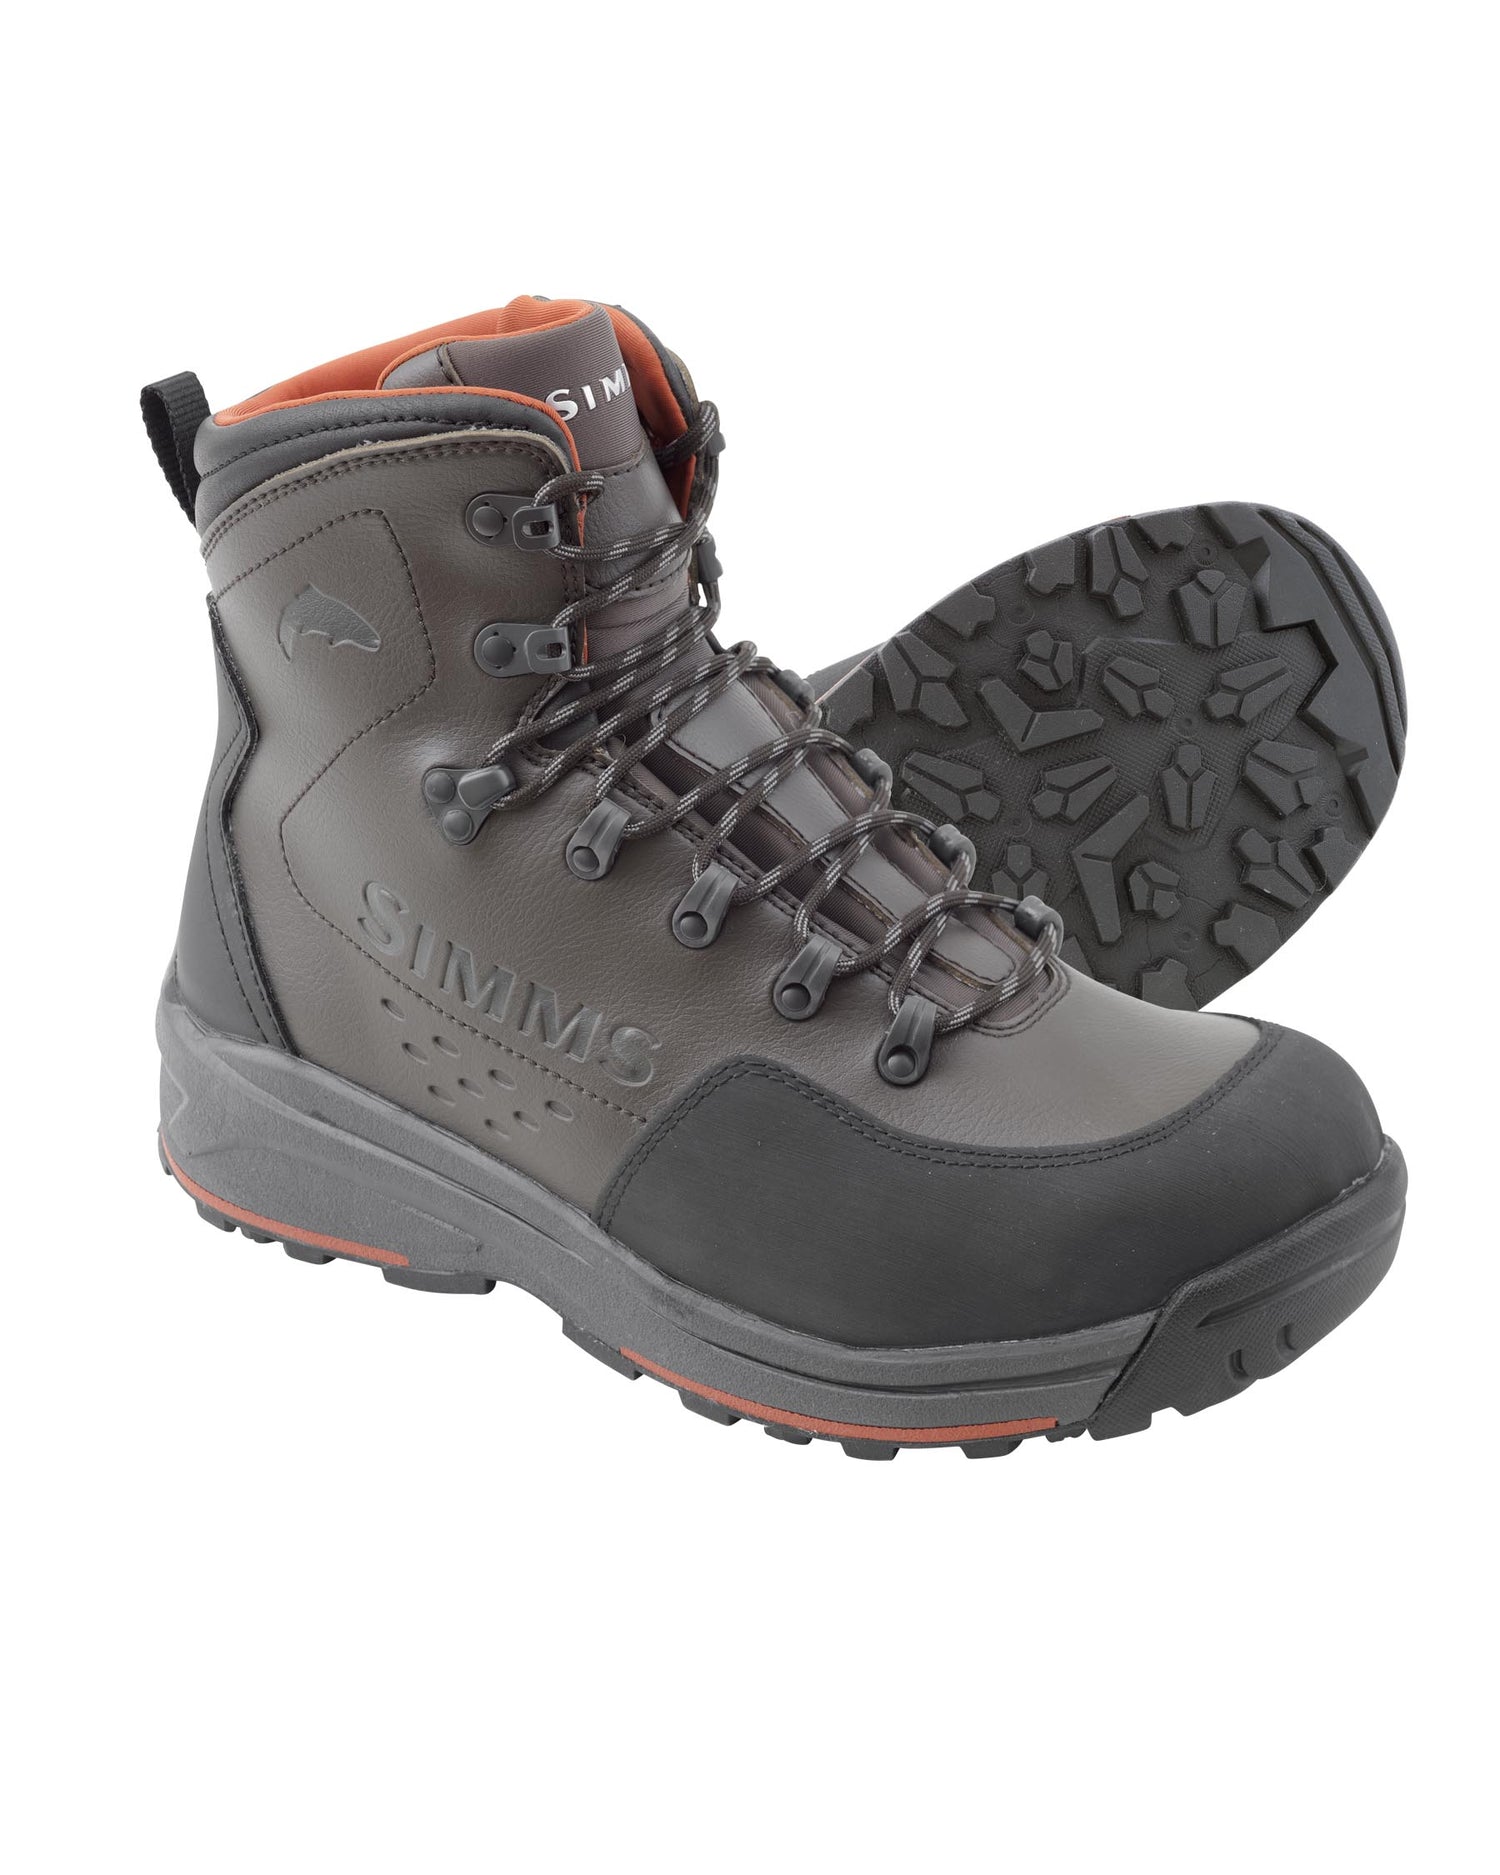 At grund Afgørelse M's Freestone® Wading Boots - Rubber Soles | Simms Fishing Products